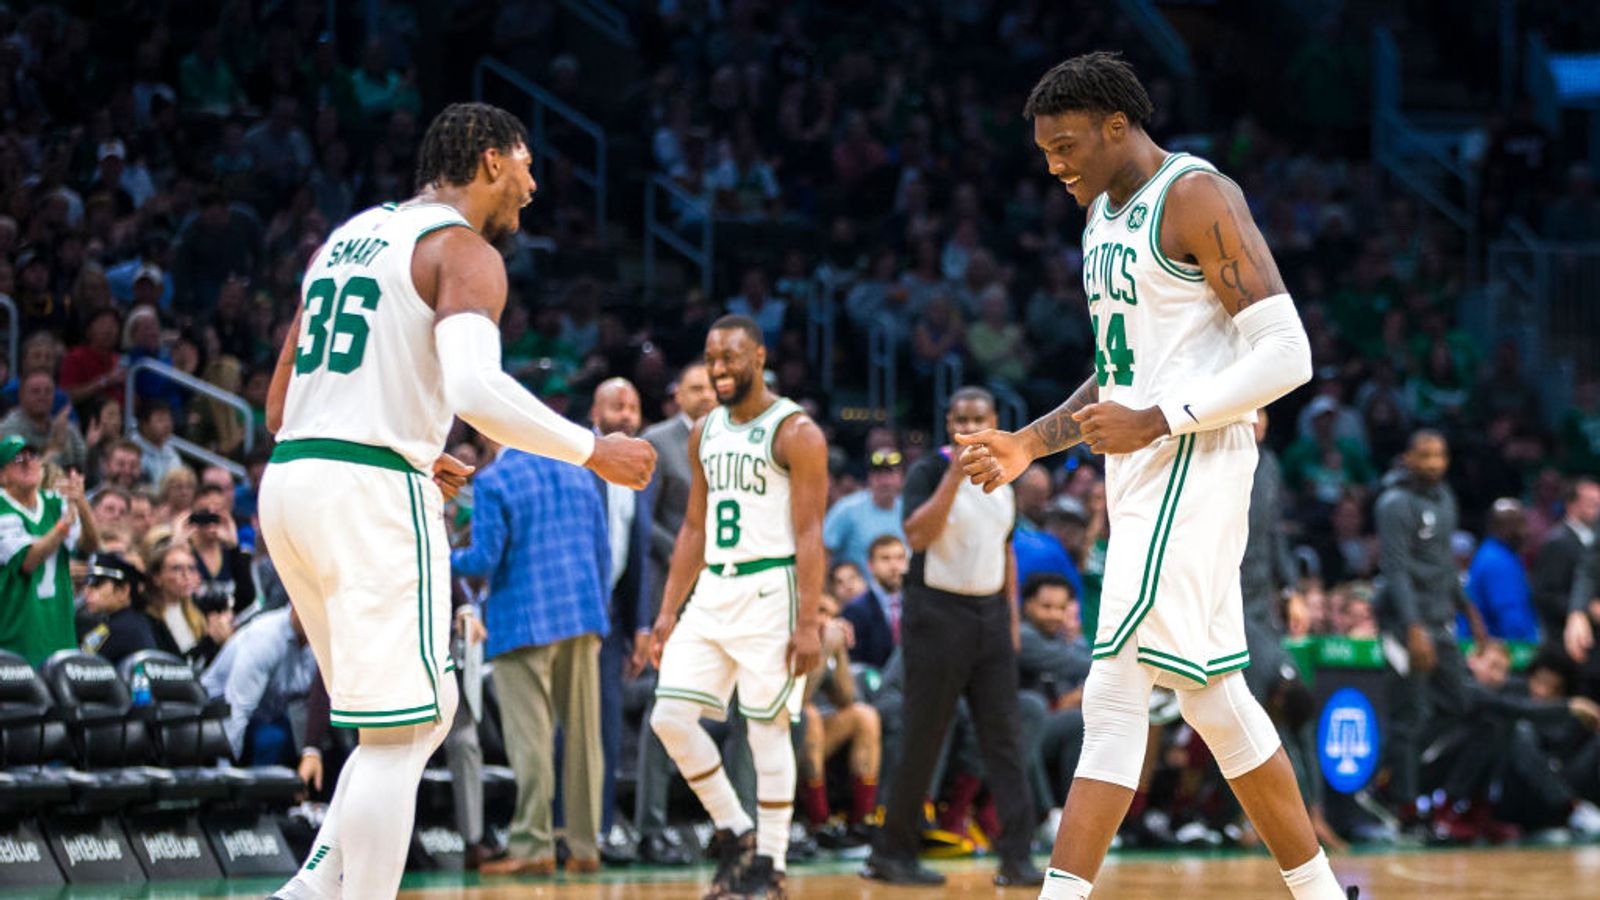 Marcus Smart agrees to $77 million extension with the Boston Celtics